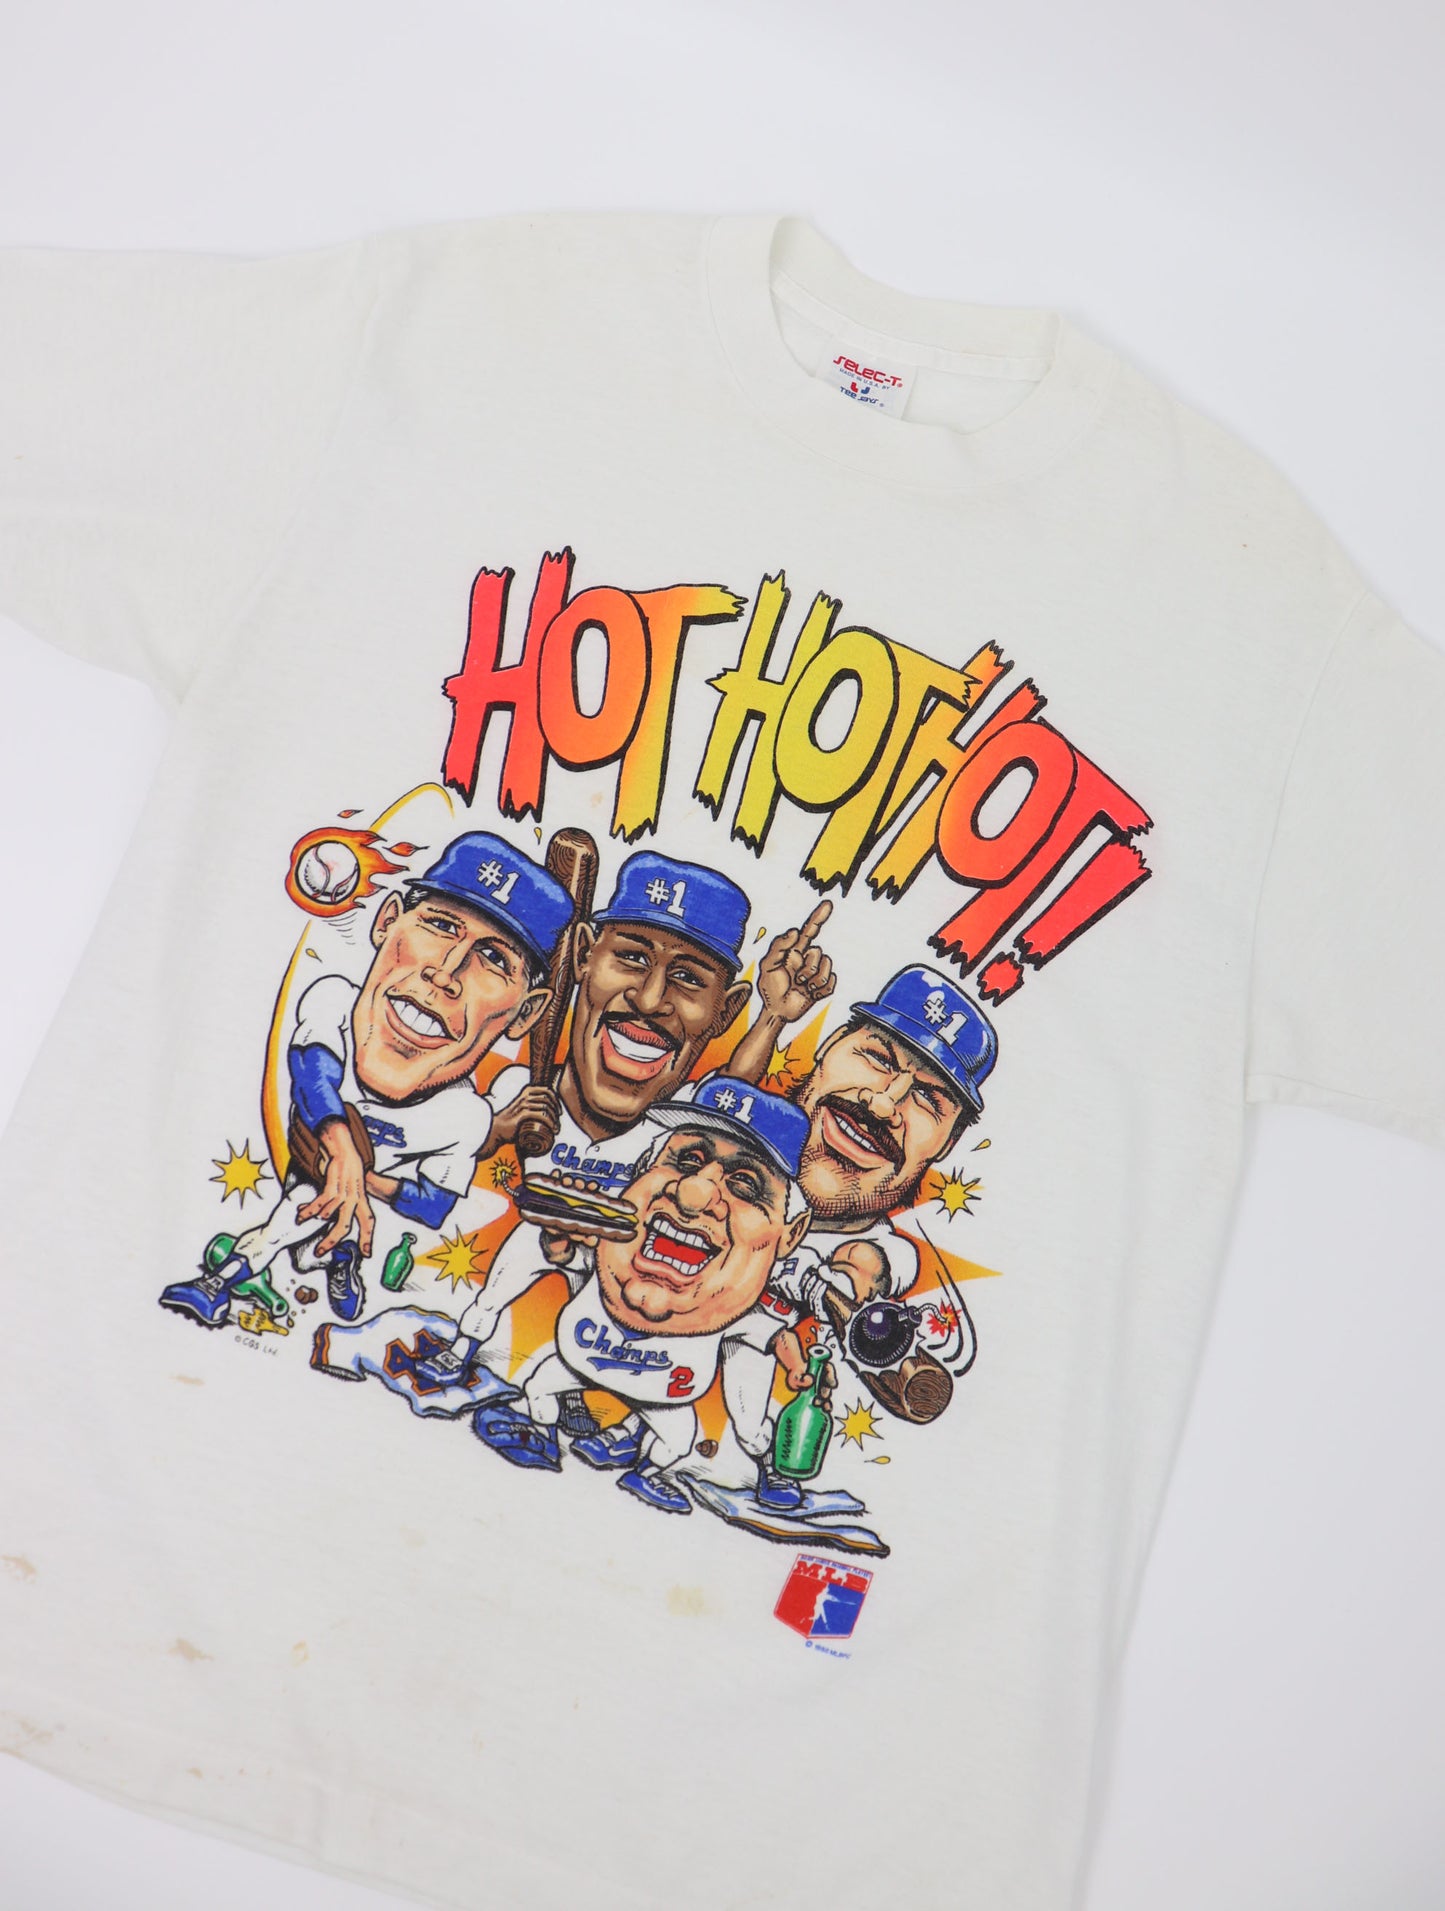 DODGERS CHARACTERS HOT HOT HOT 1988 MADE IN USA